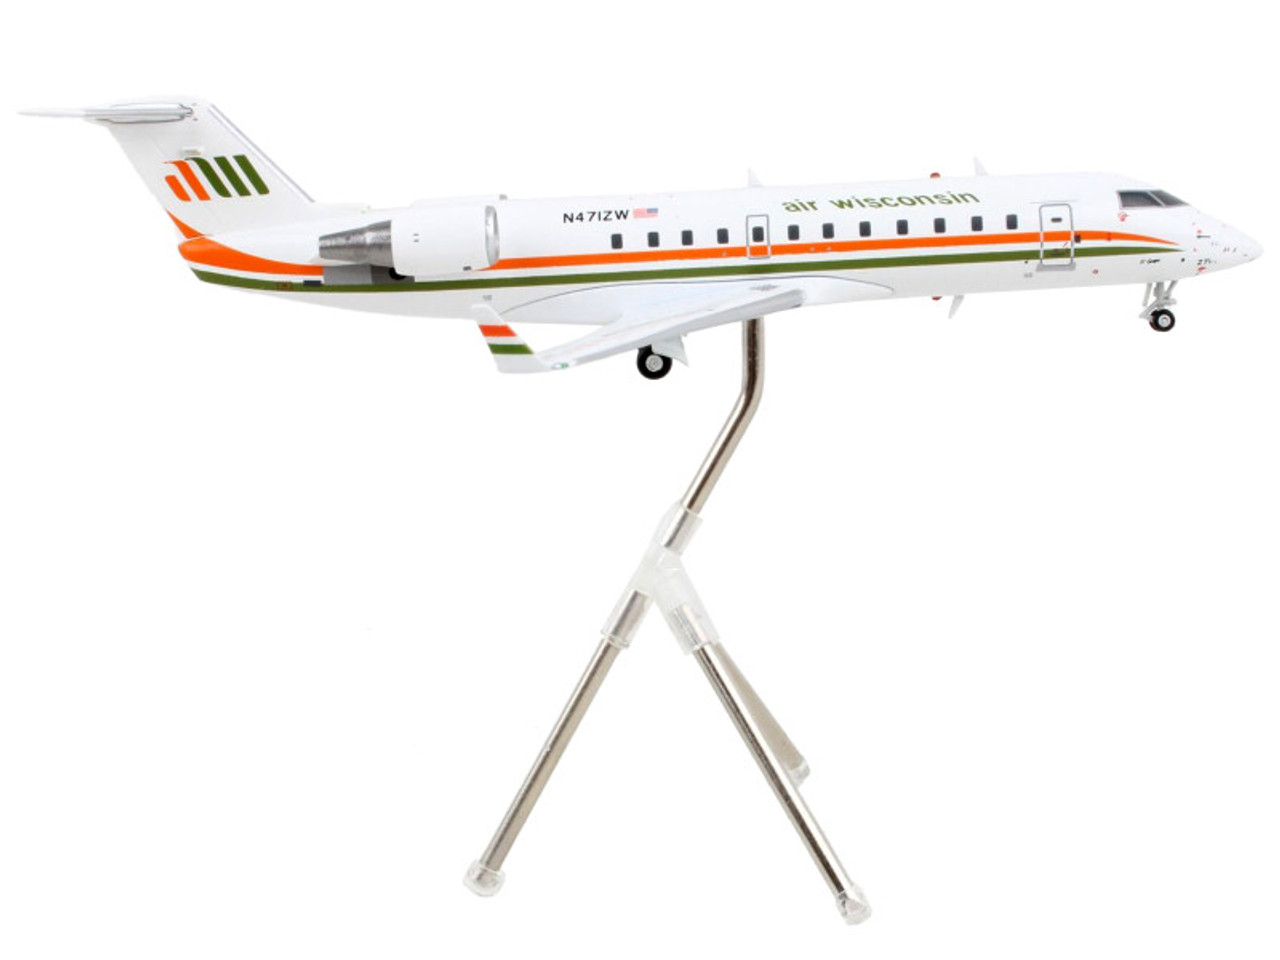 Bombardier CRJ200 Commercial Aircraft "Air Wisconsin" White with Orange and Green Stripes "Gemini 200" Series 1/200 Diecast Model Airplane by GeminiJets